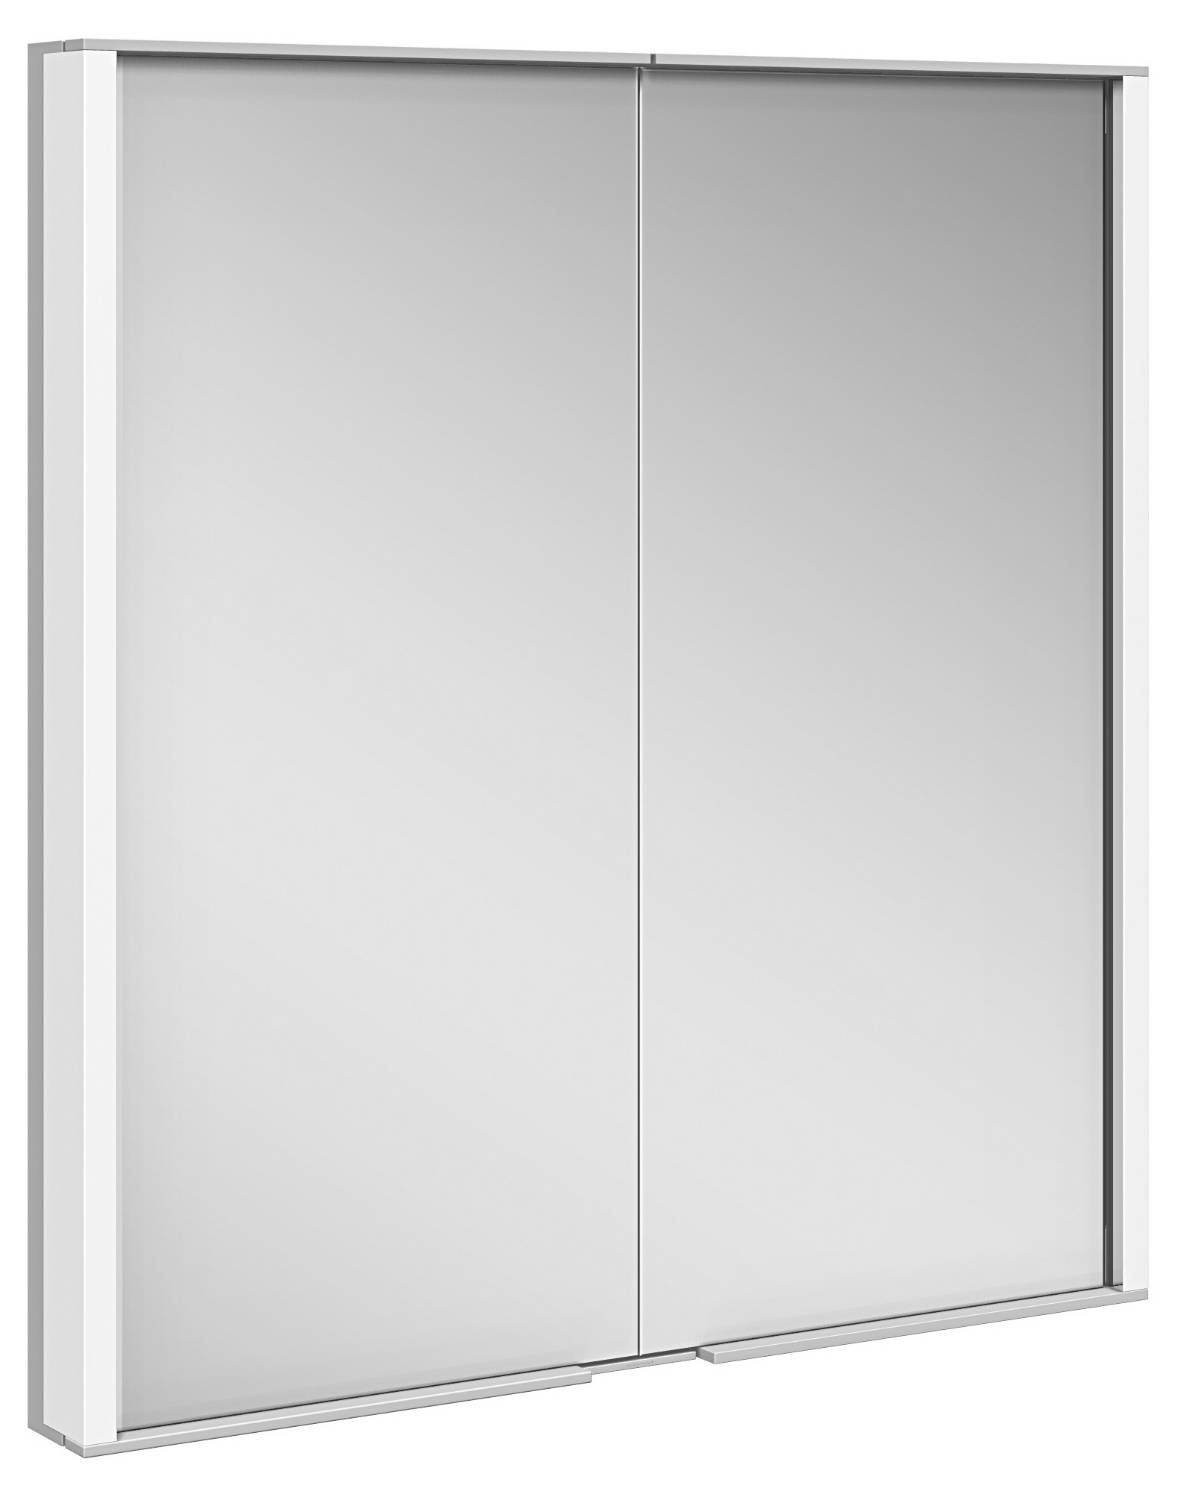 Mirror Cabinet - with Lighting - Recessed & Wall Mounted options - ROYAL MATCH - Mirror Cabinet